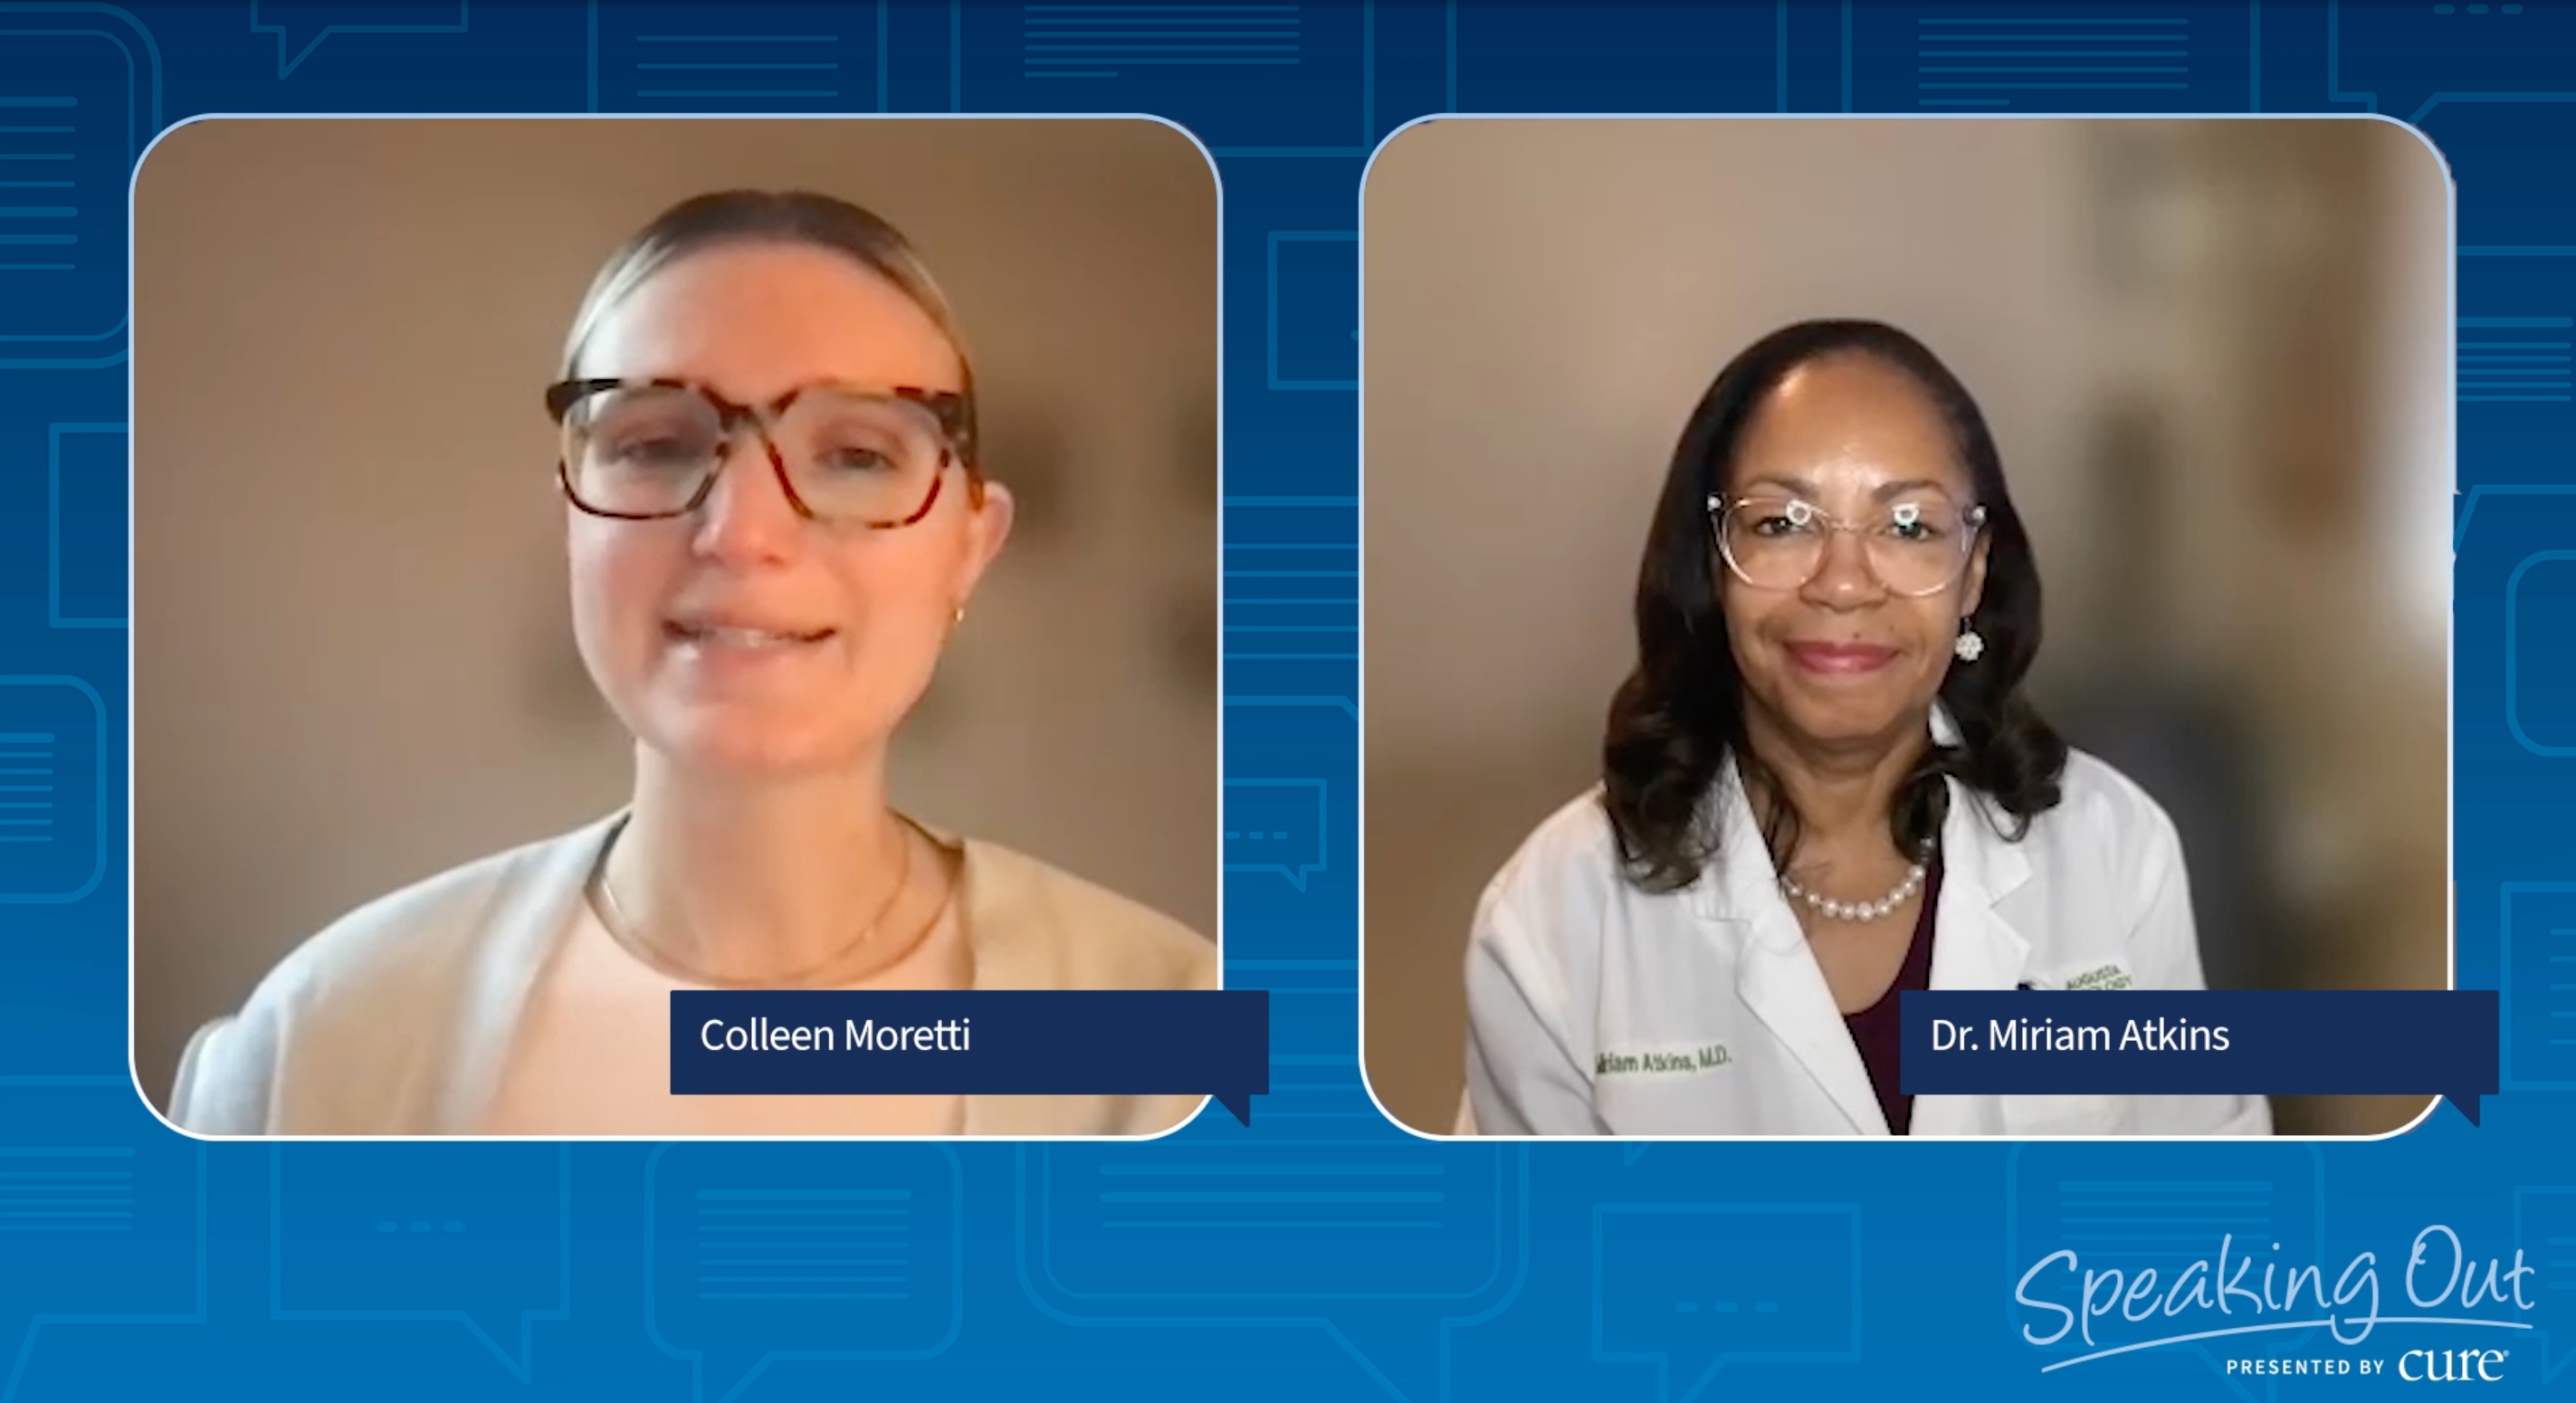 Discussing Obstacles Patients and Physicians Face During Cancer Care